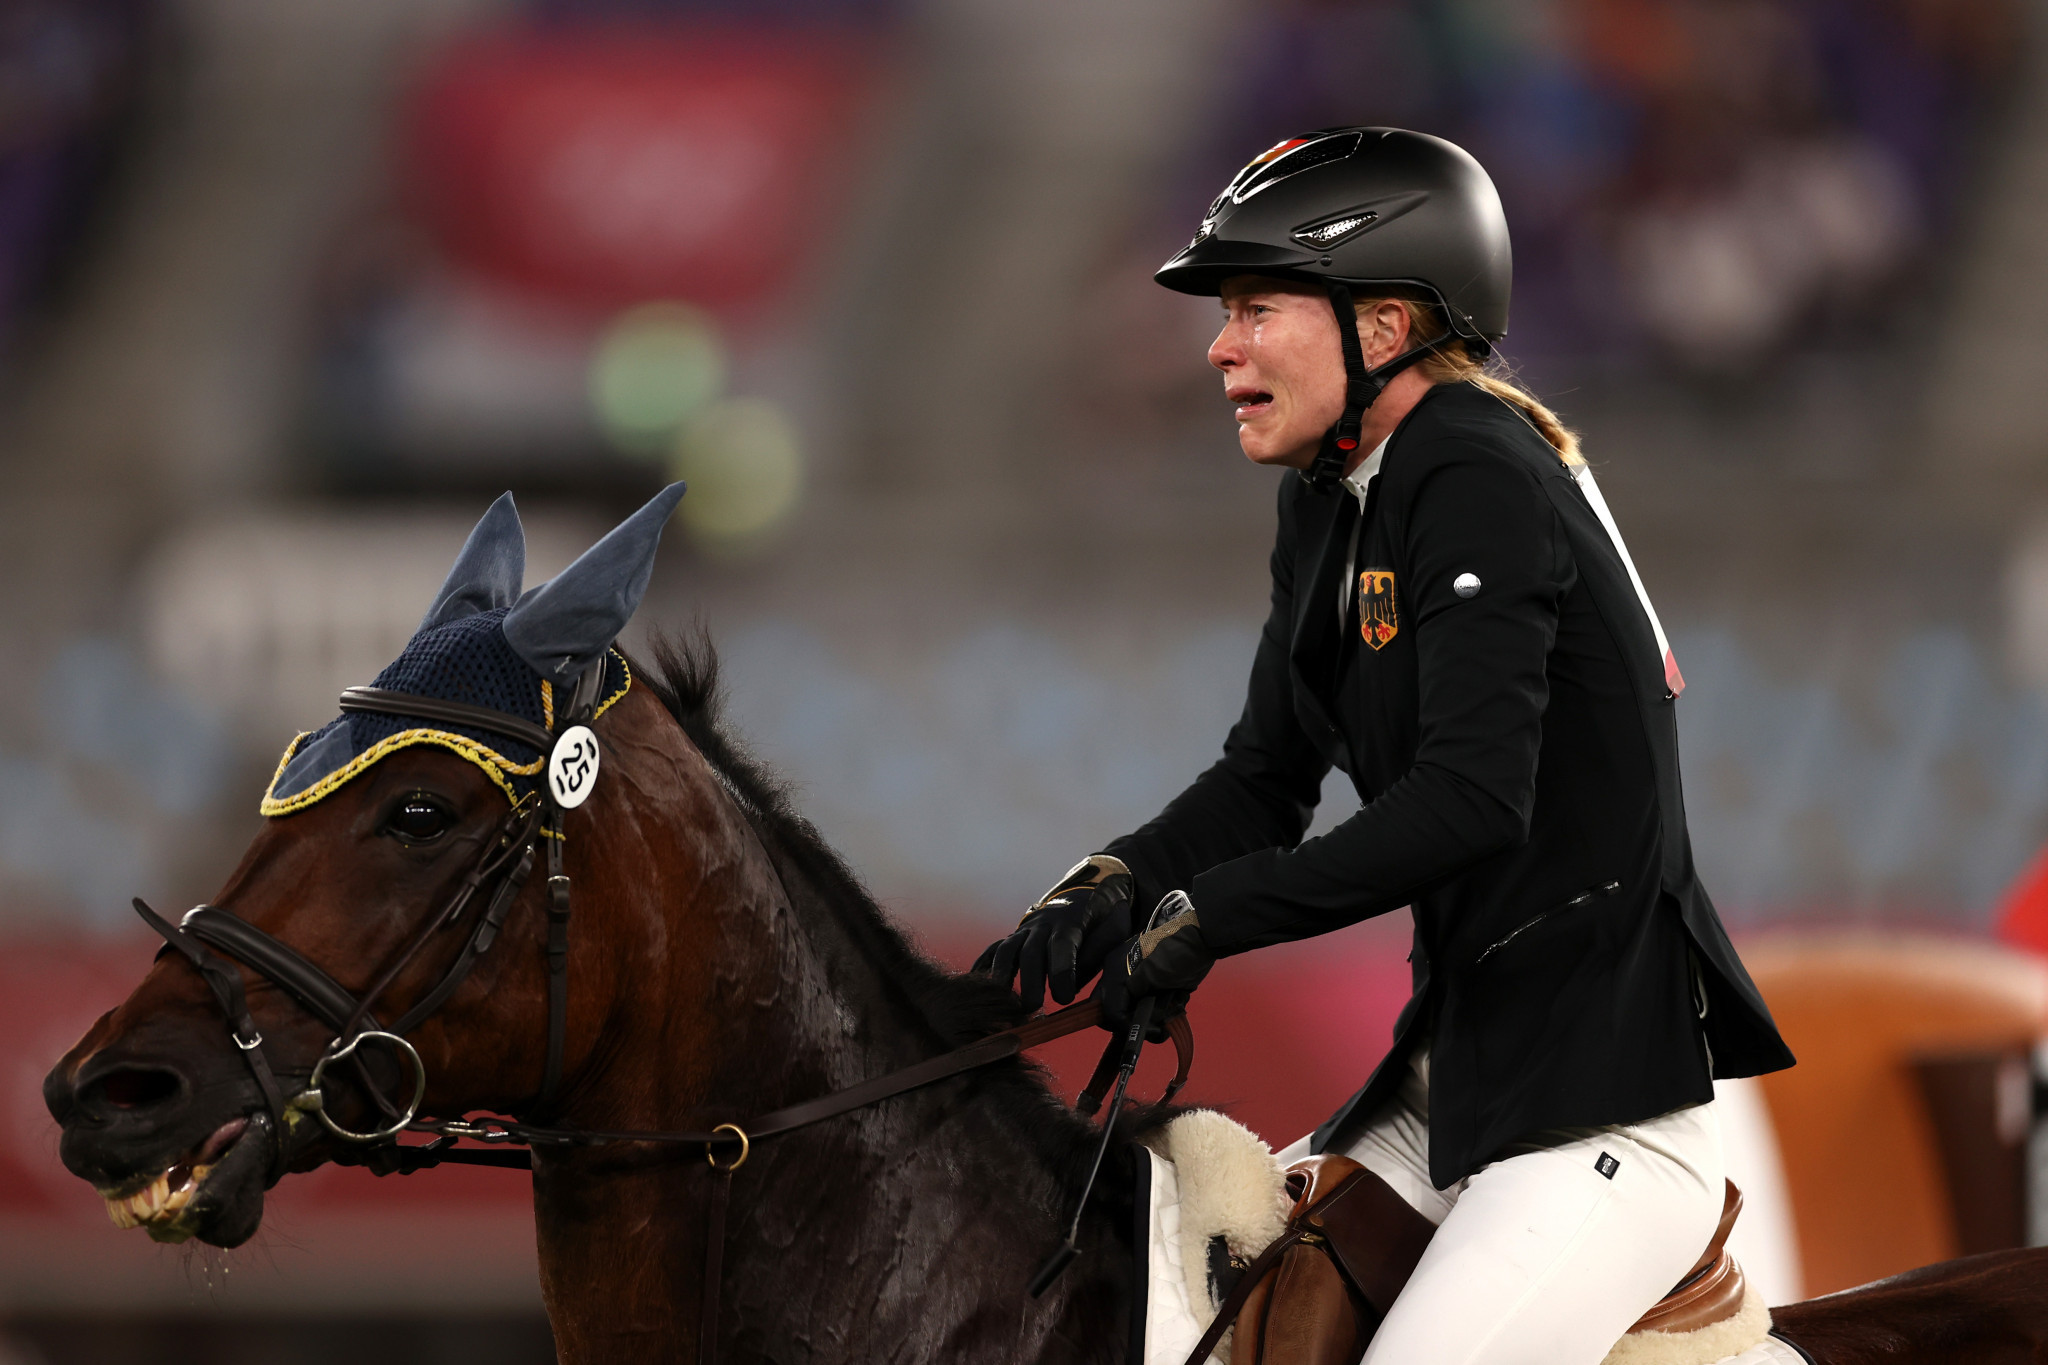 FEI President Ingmar de Vos said the incident when Annika Schleu's horse was struck by a coach after the Olympic modern pentathlon competition in Tokyo was bad for all equestrian sport ©Getty Images